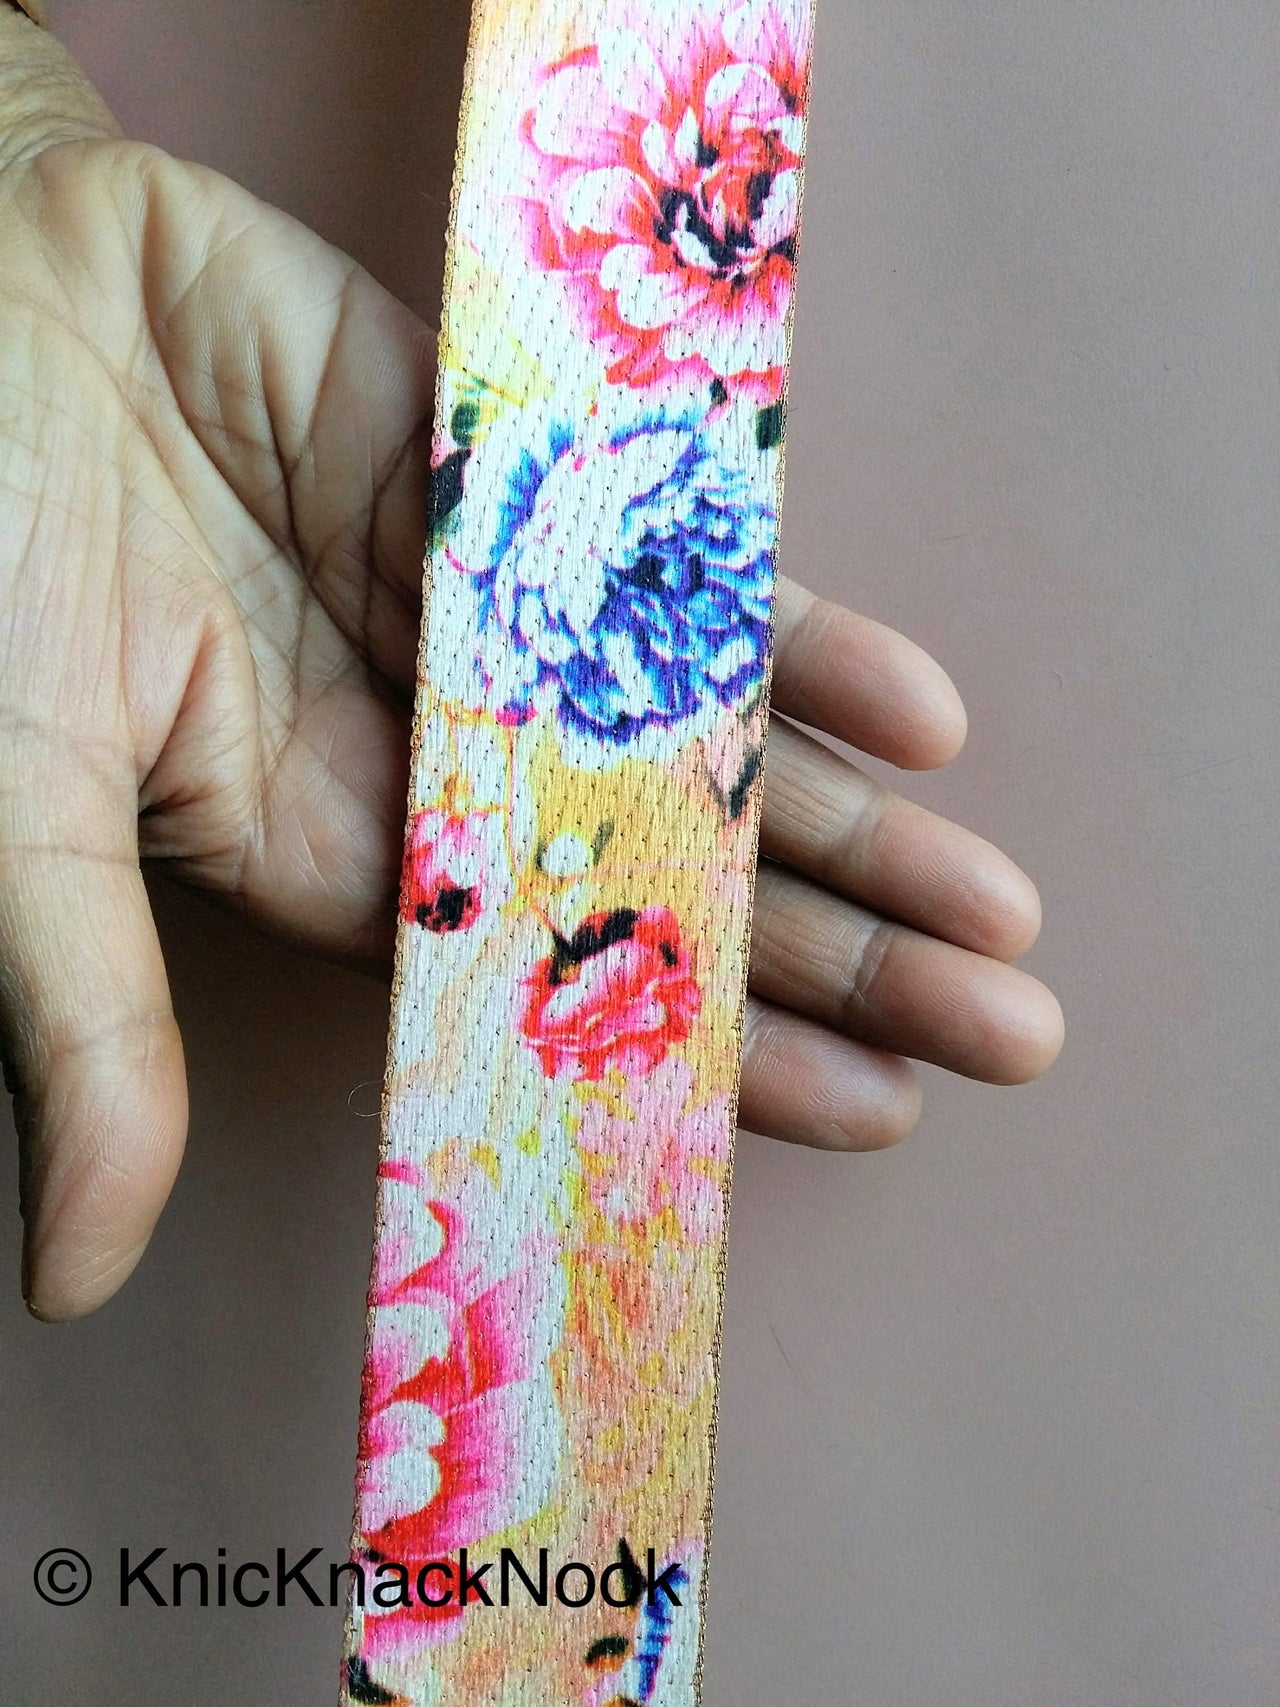 Beige, Pink, Blue and Brown Print Floral Fabric Trim